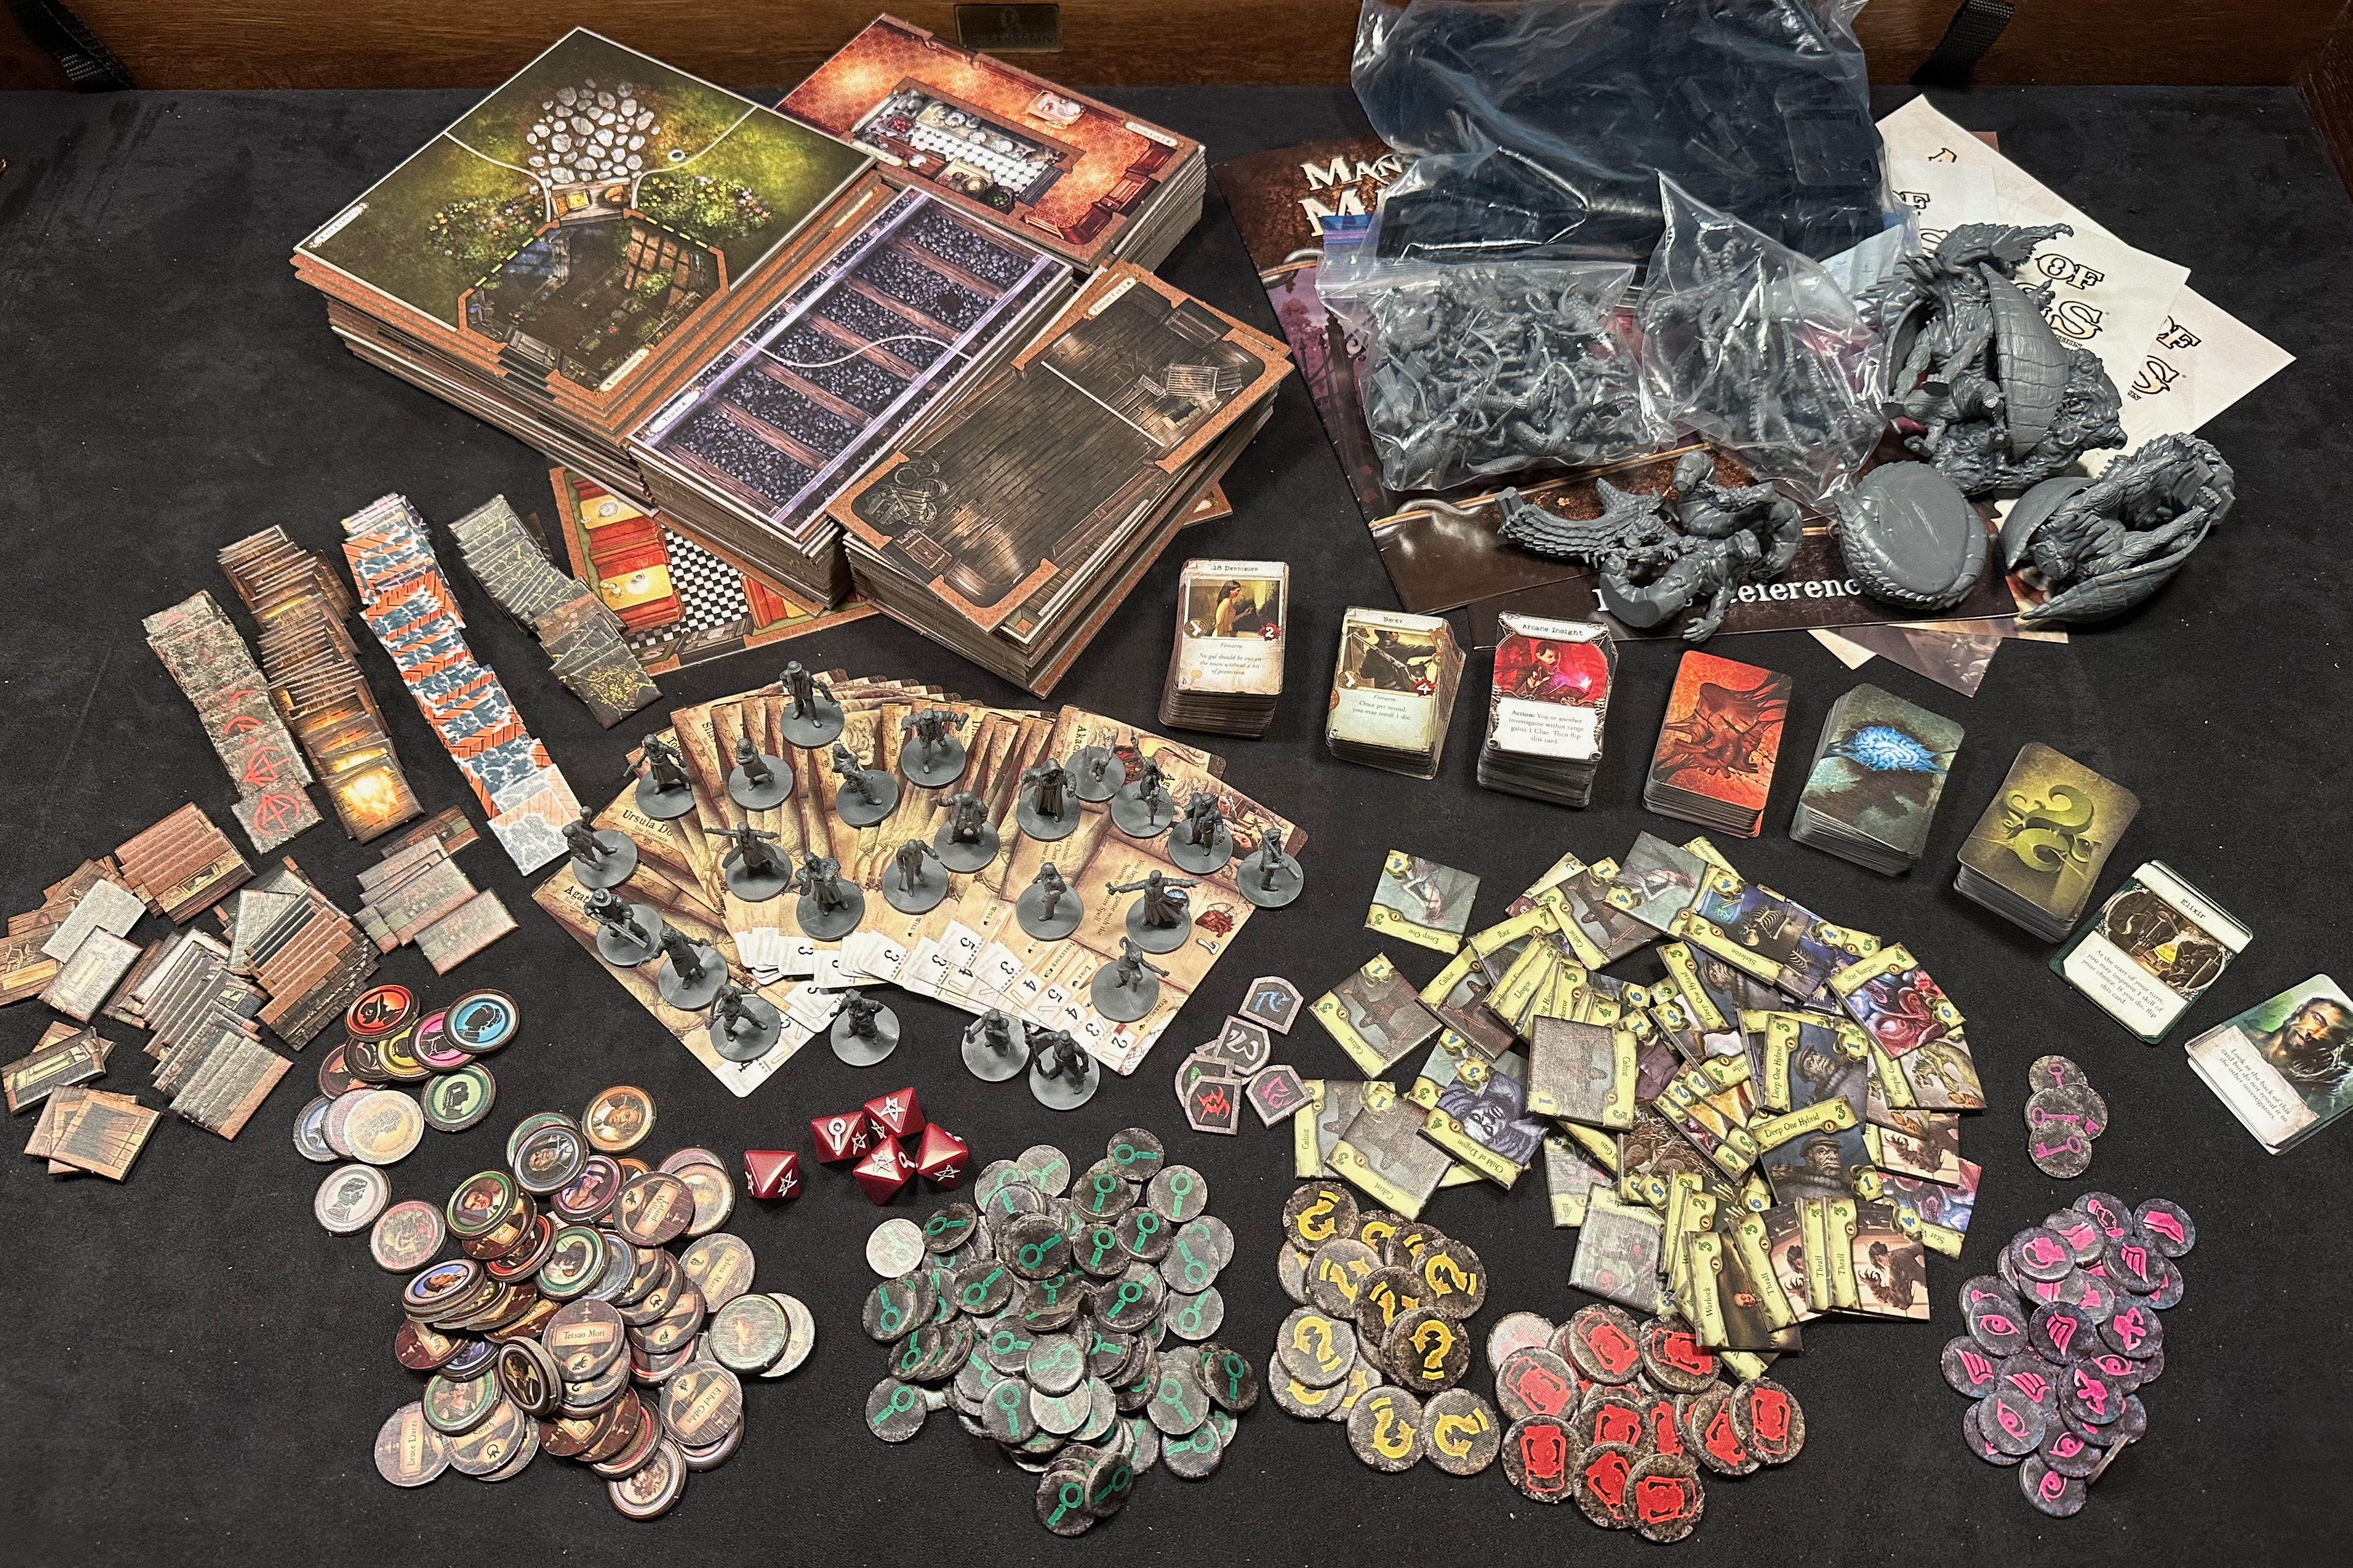 Unpacked contents of Mansions of Madness